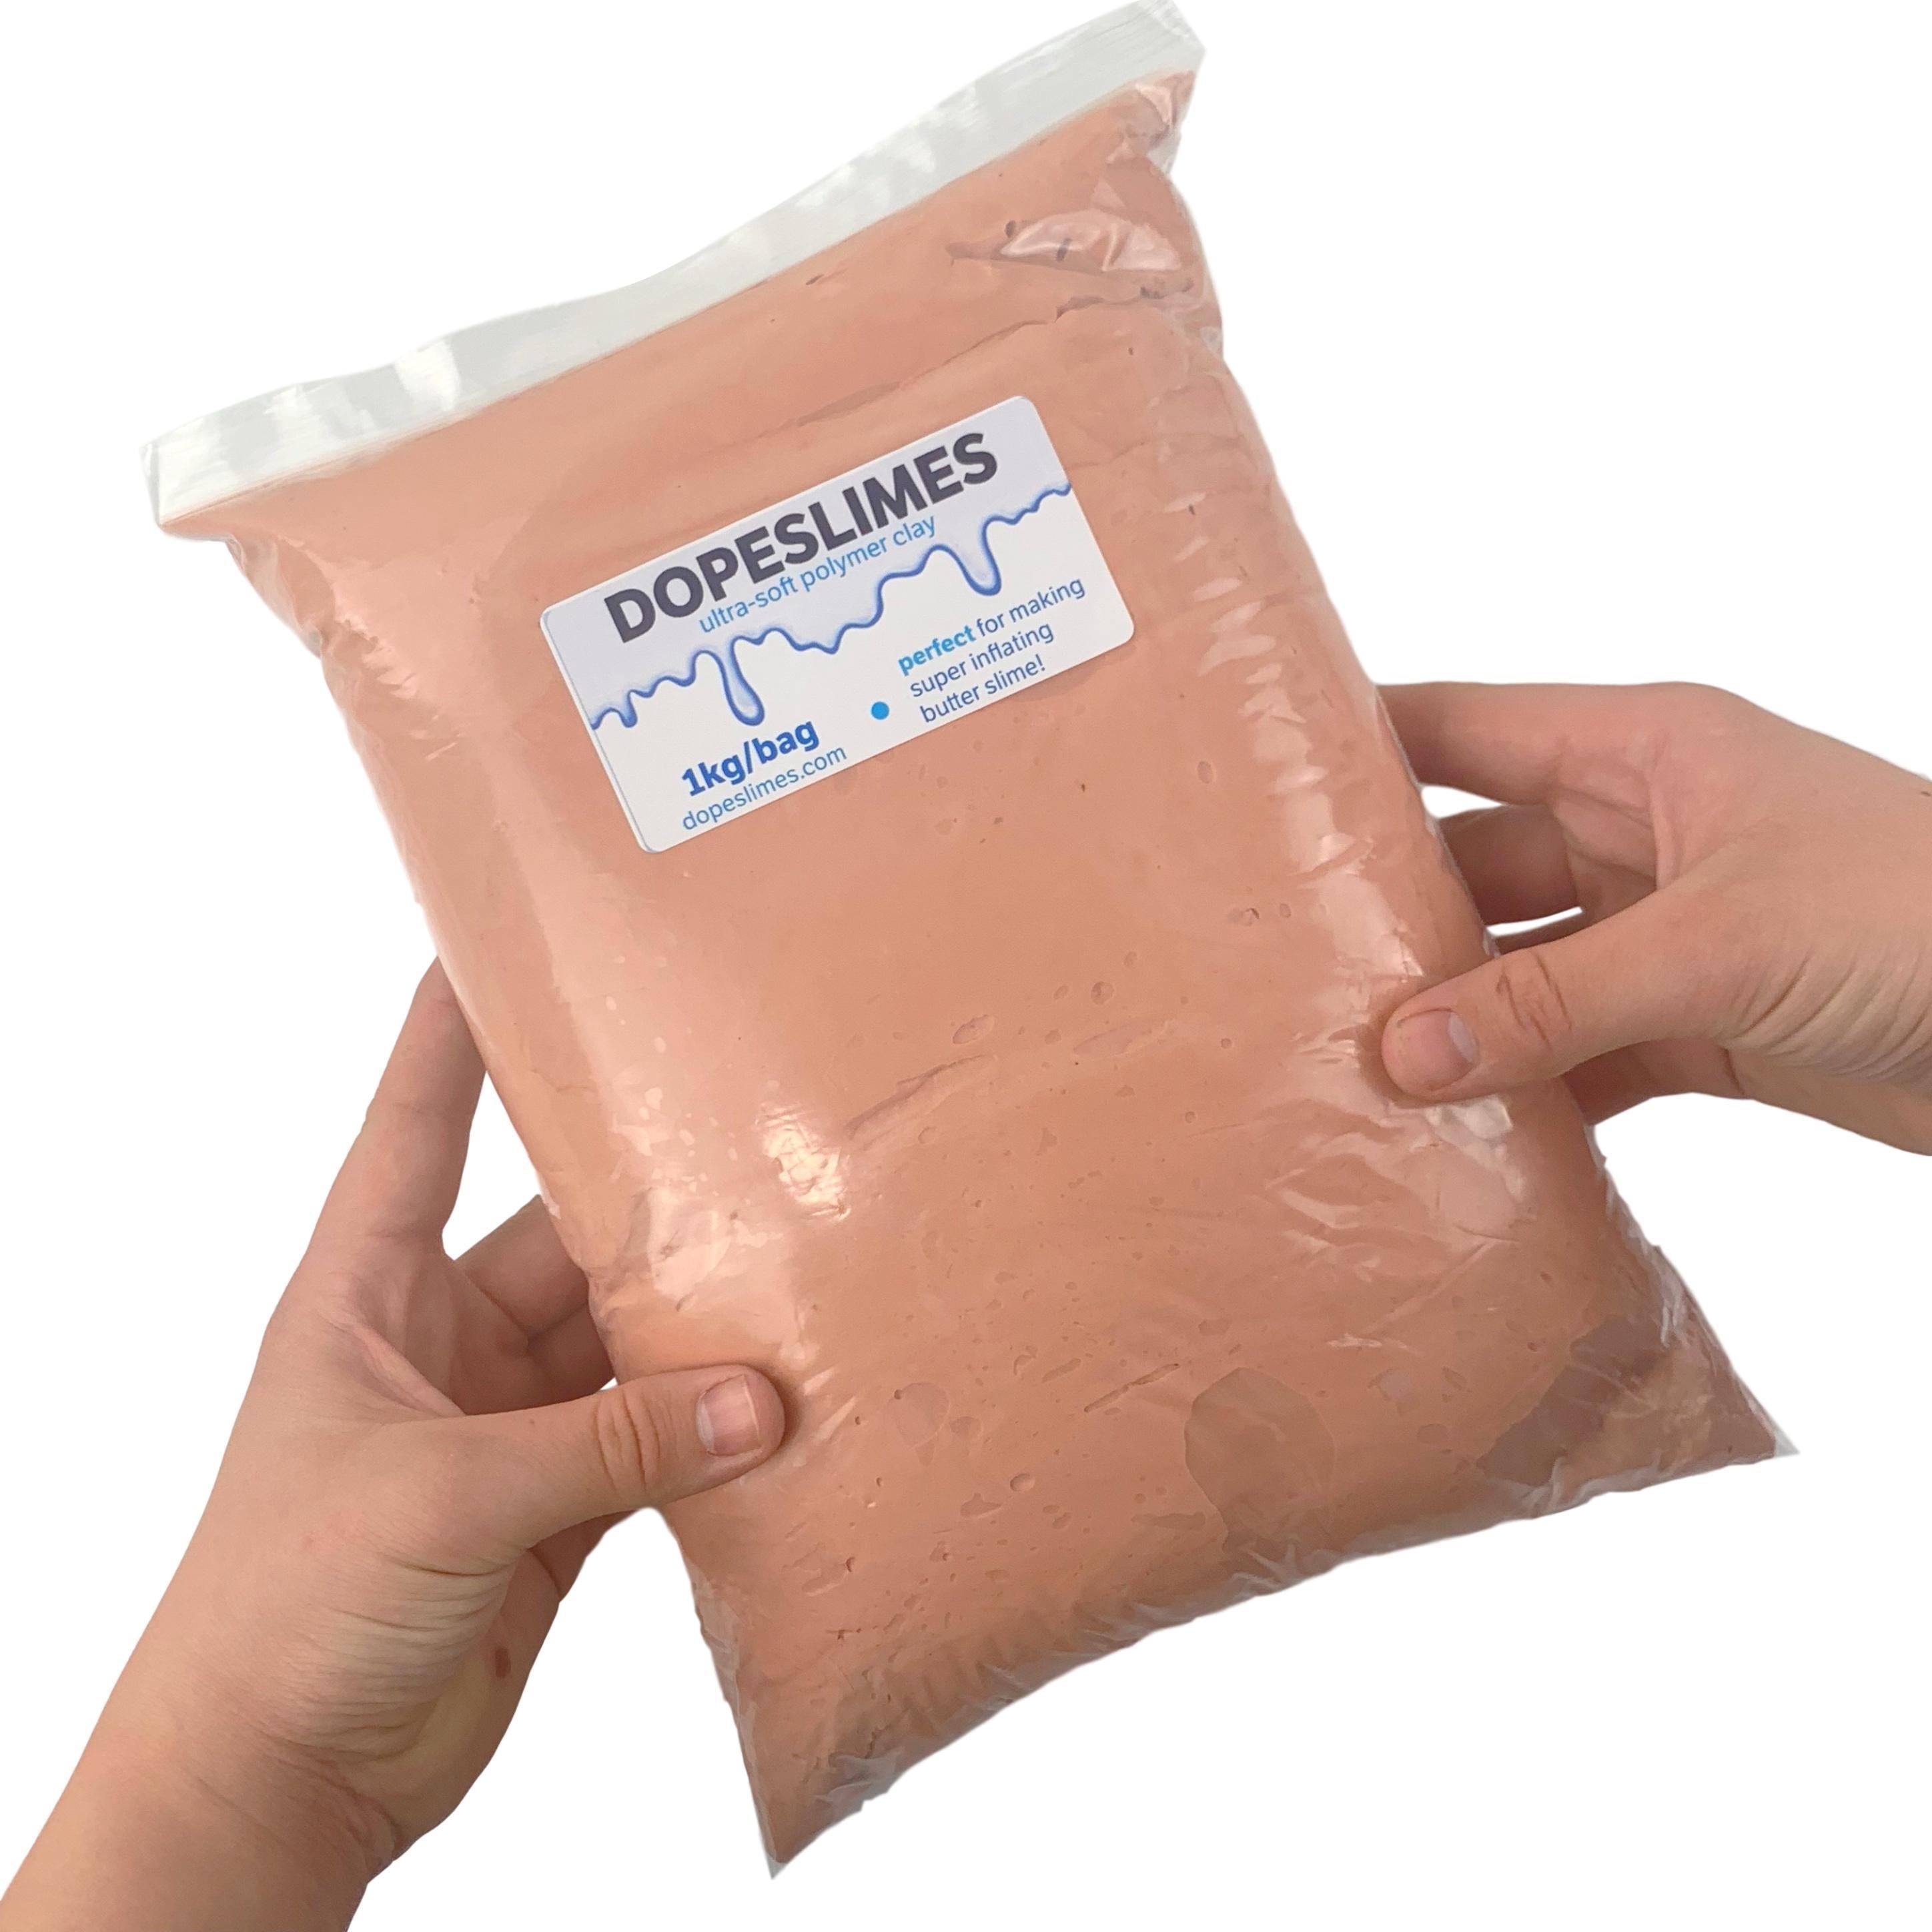 HUGE Soft Inflating Polymer Slime Clay - 1kg - Buy Discounted Clay 